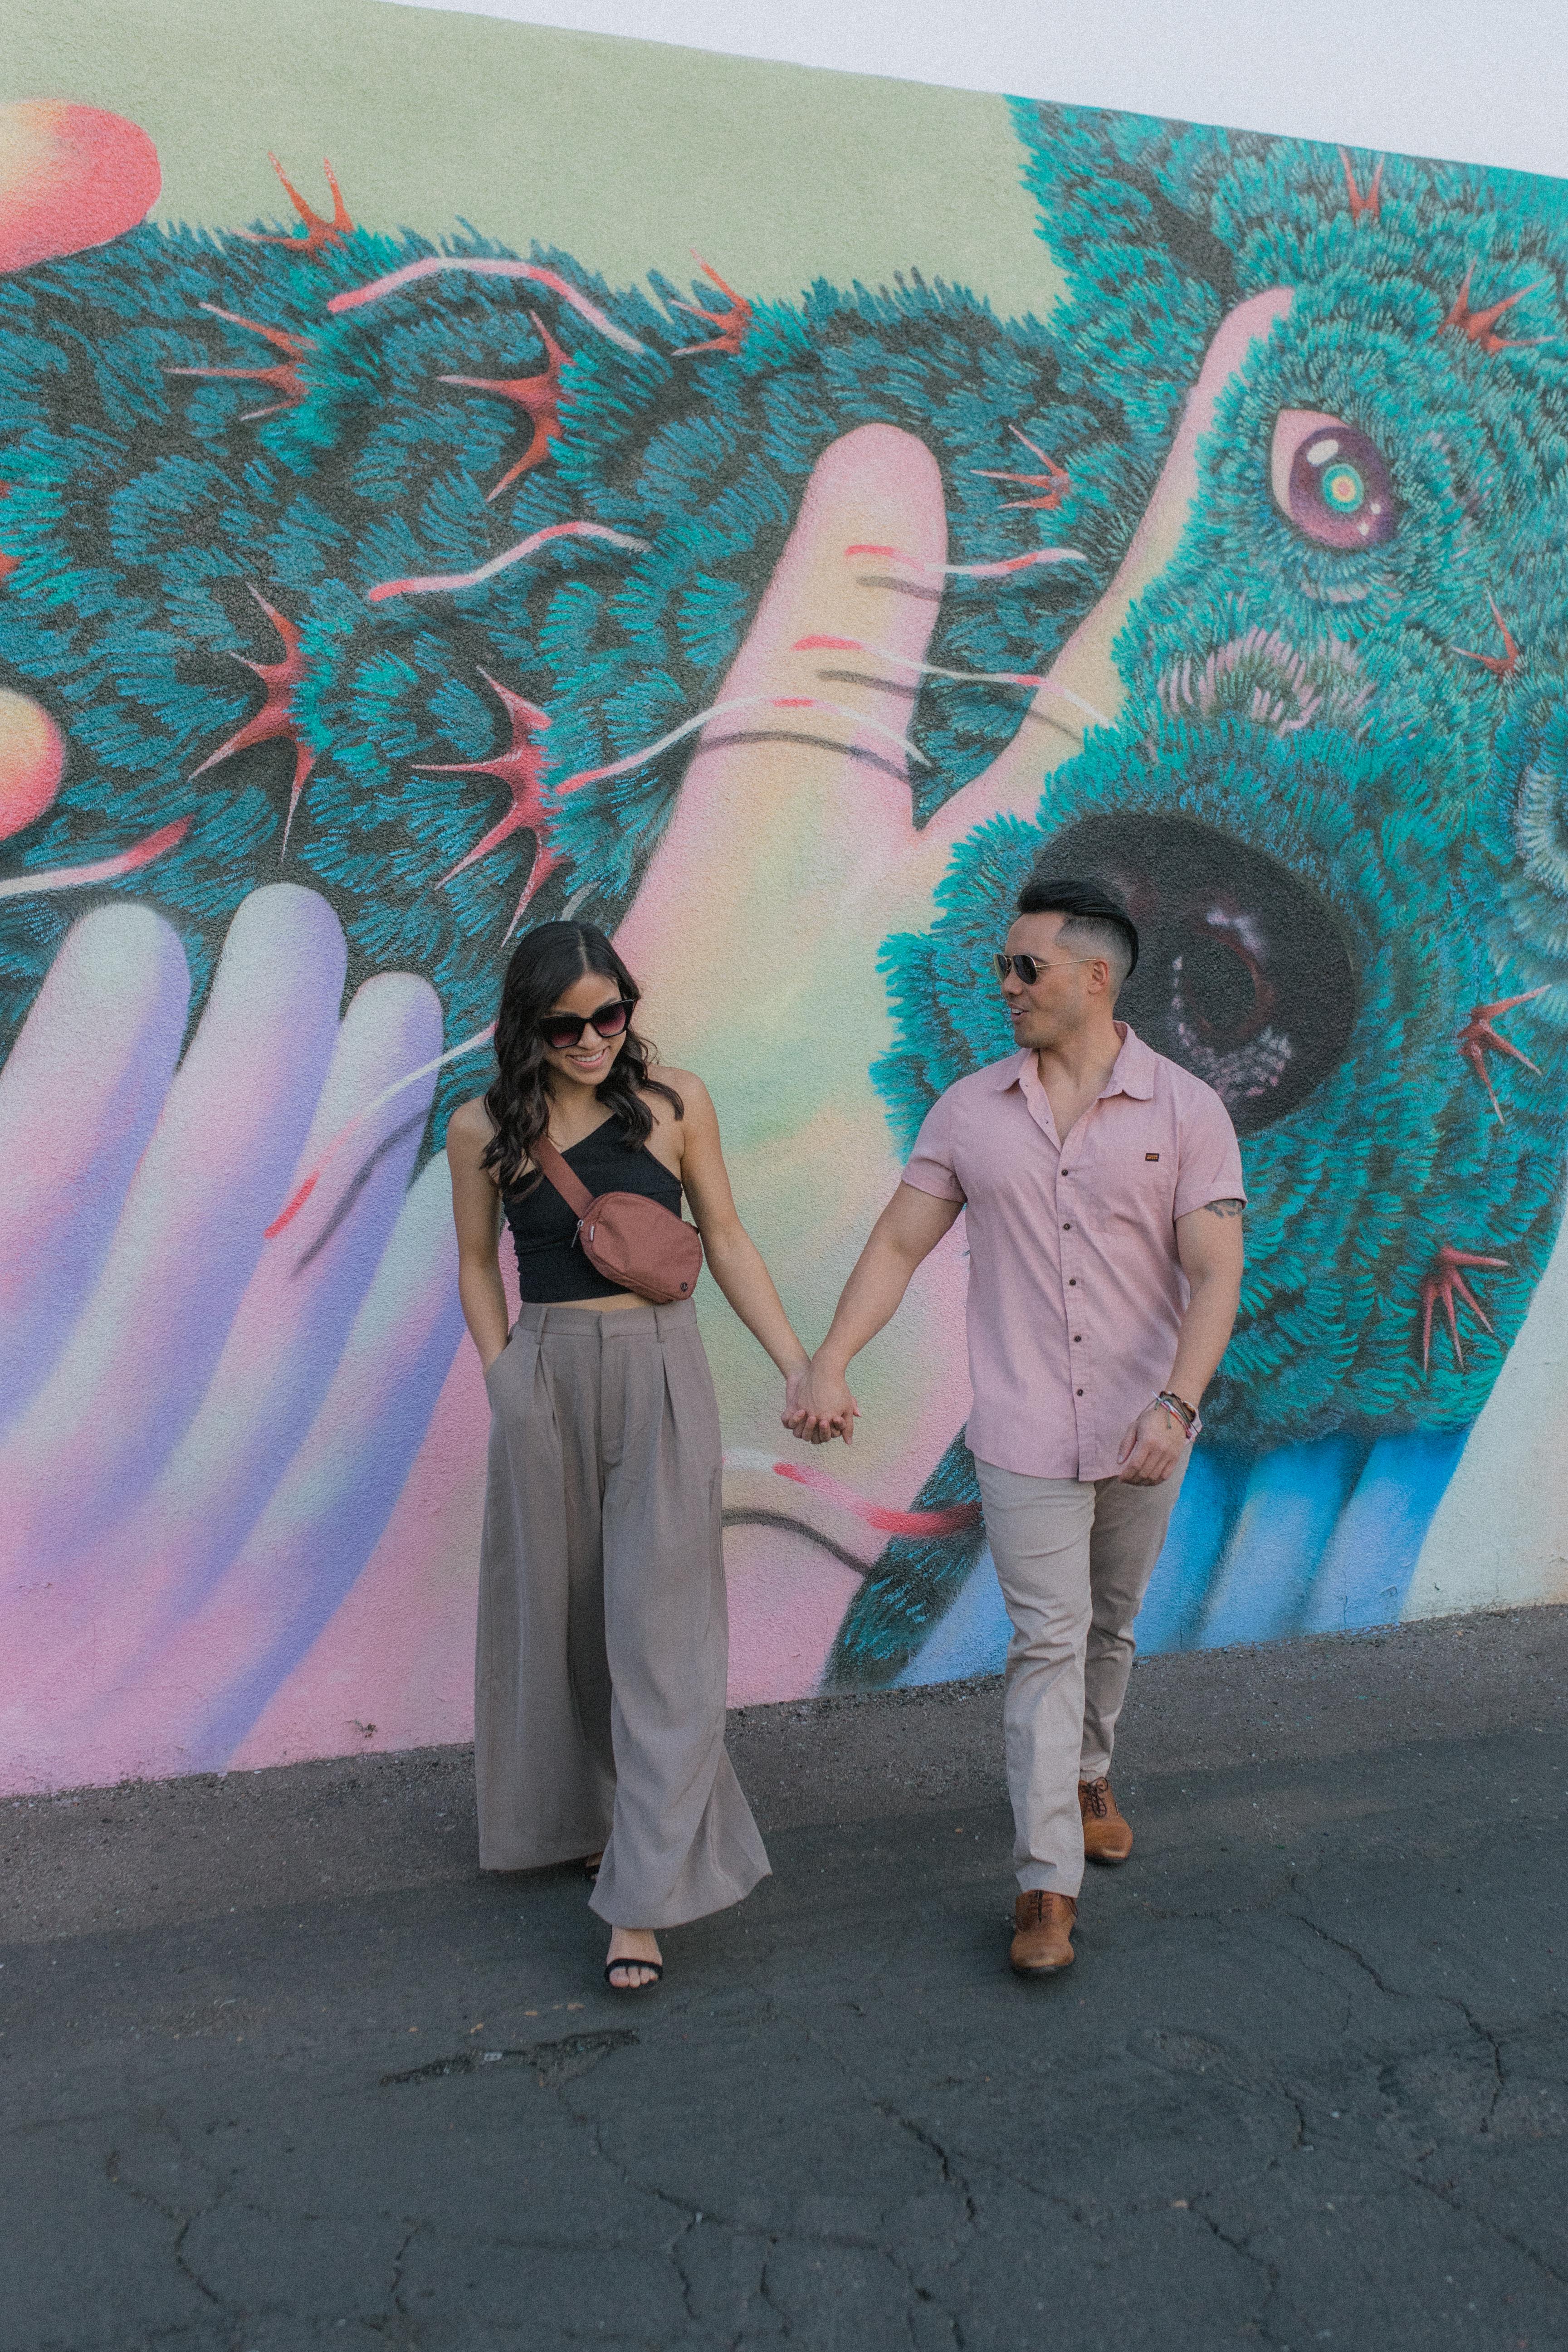 Image of two individuals in front of a colorful mural